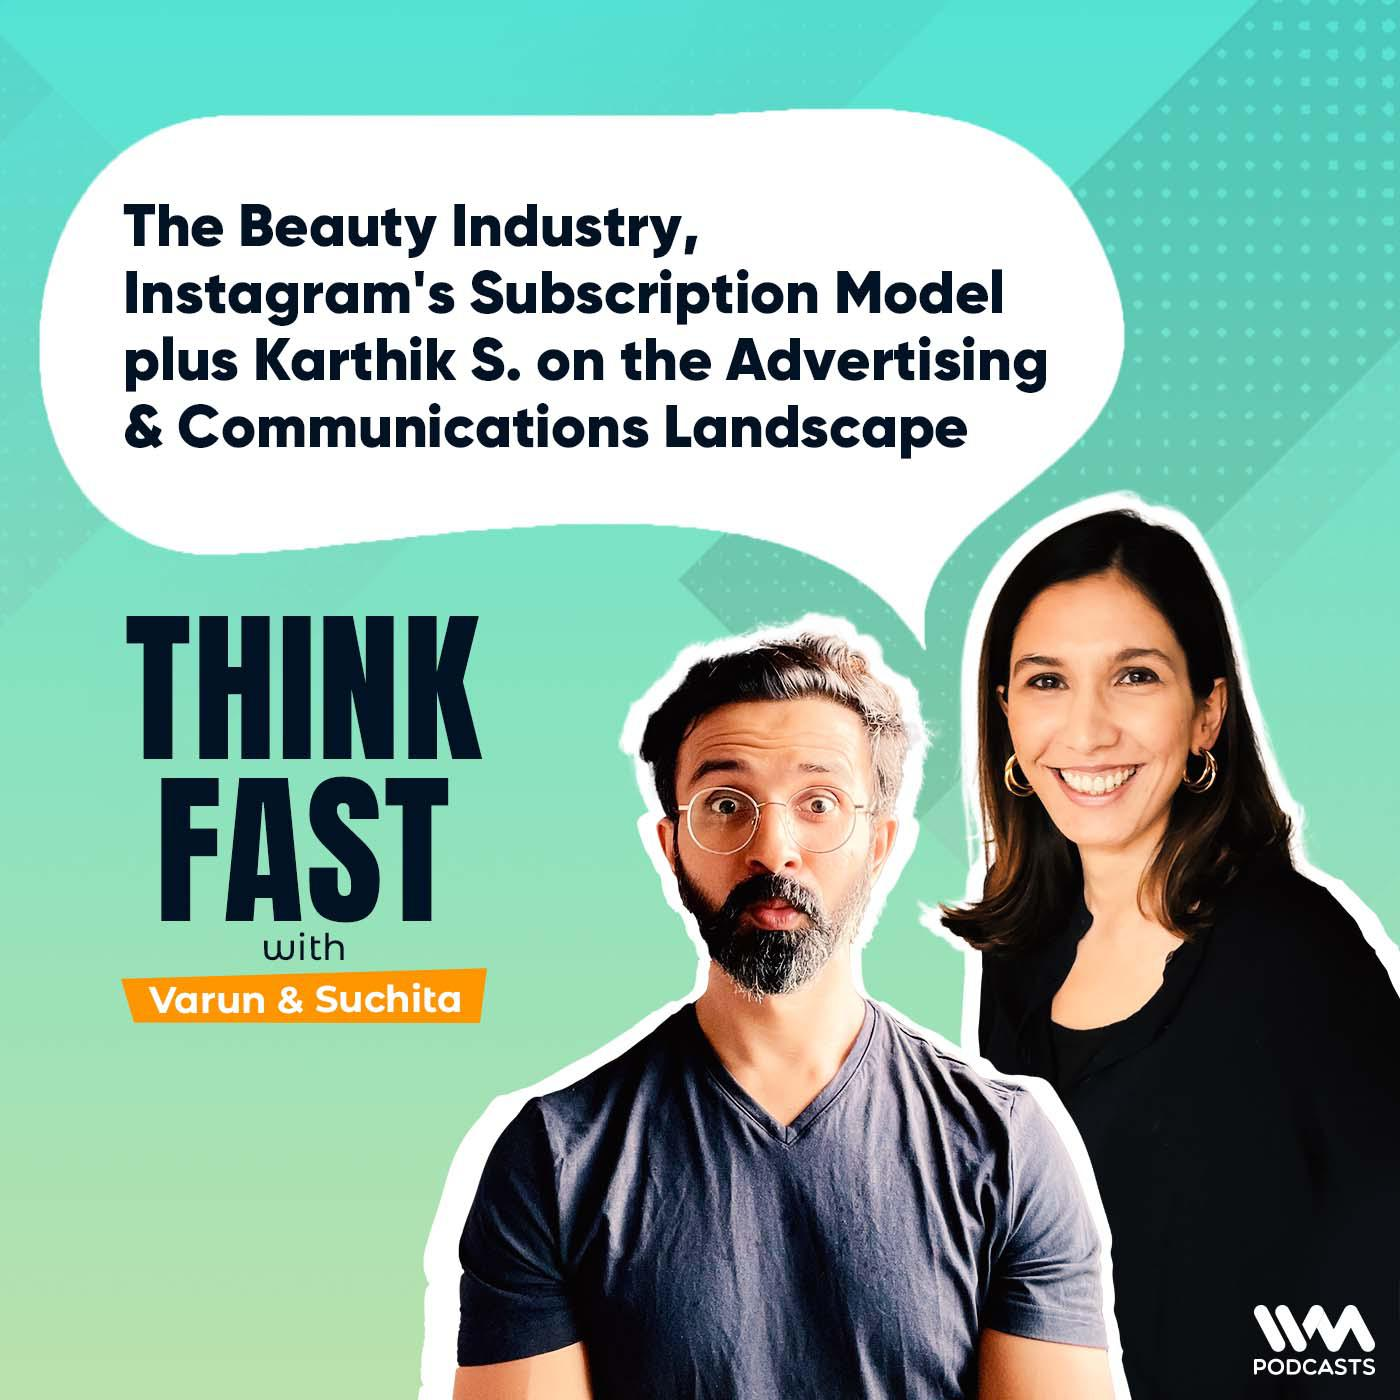 The Beauty Industry, Instagram's Subscription Model plus Karthik S. on the Advertising & Communications Landscape